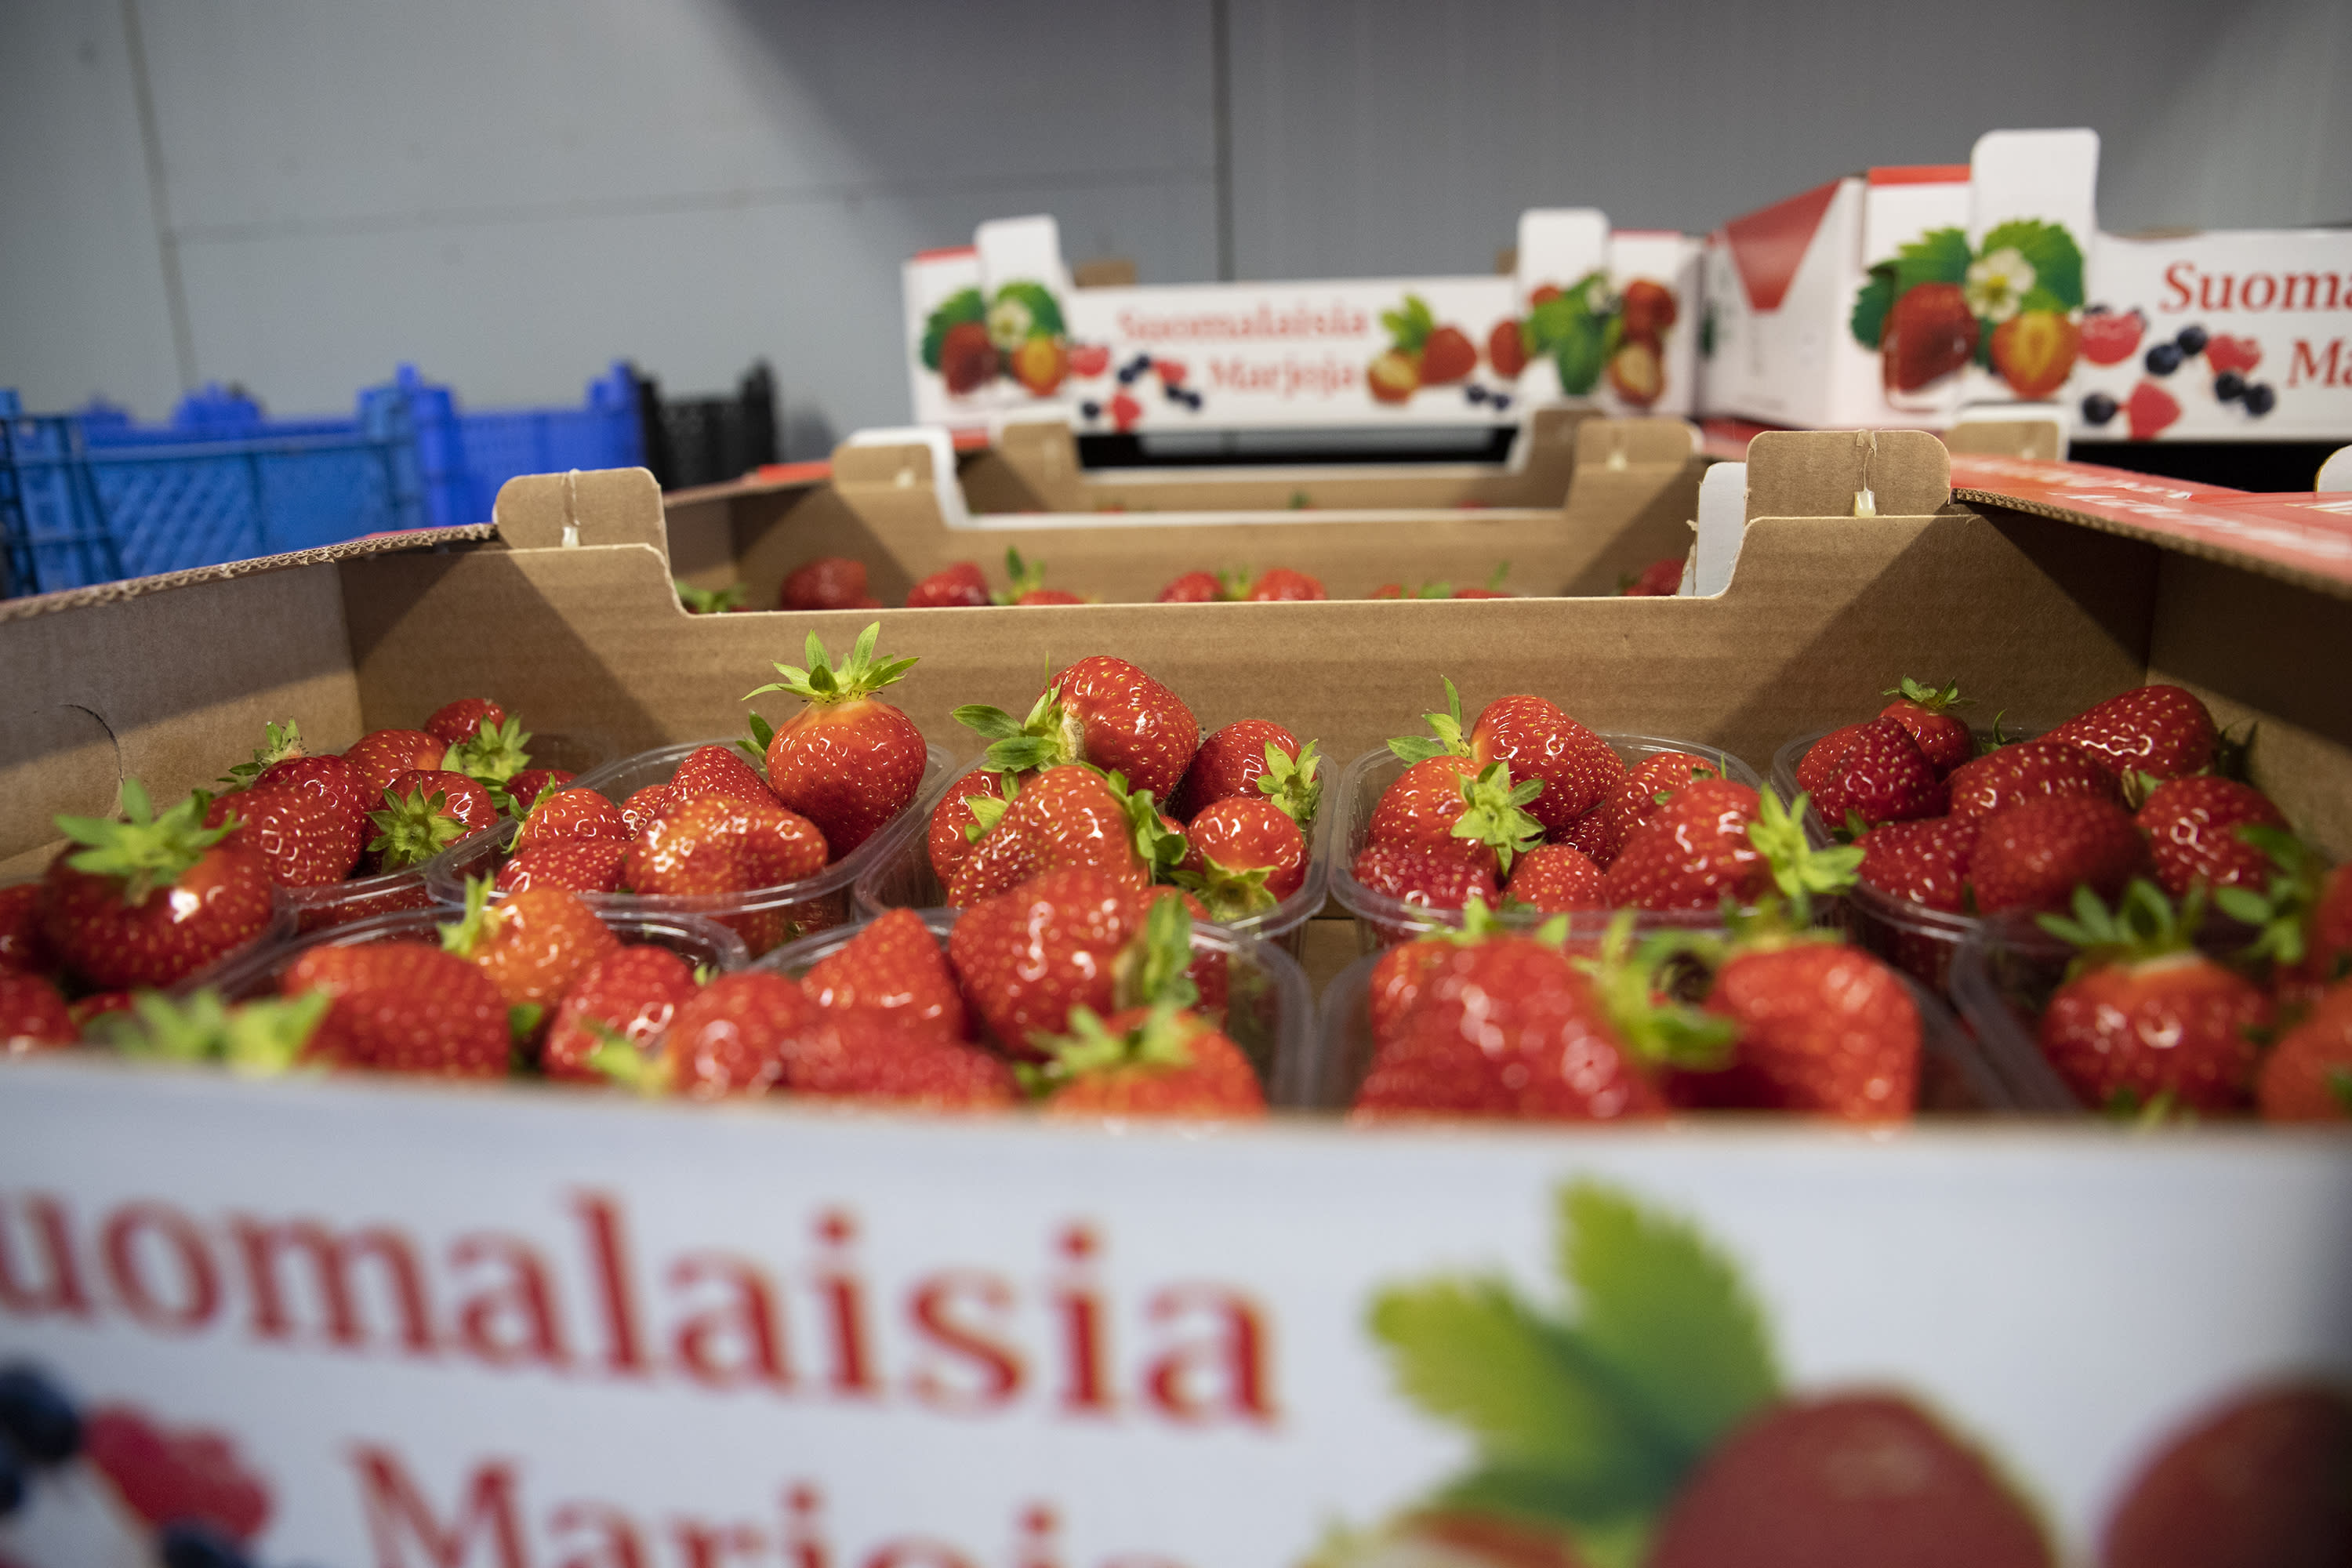 Millions of kilos of unpicked strawberries were left to rot in Finland